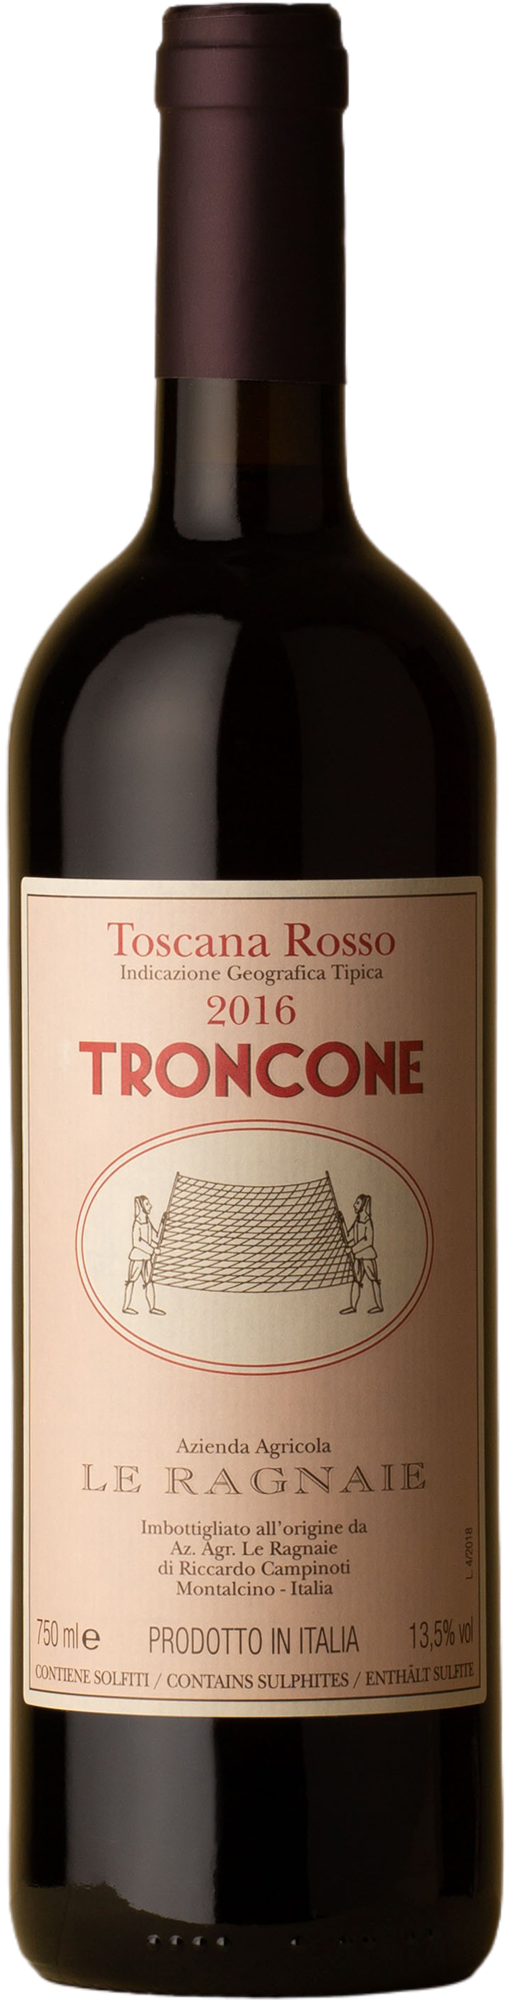 Le Ragnaie - Troncone Sangiovese 2016 Red Wine